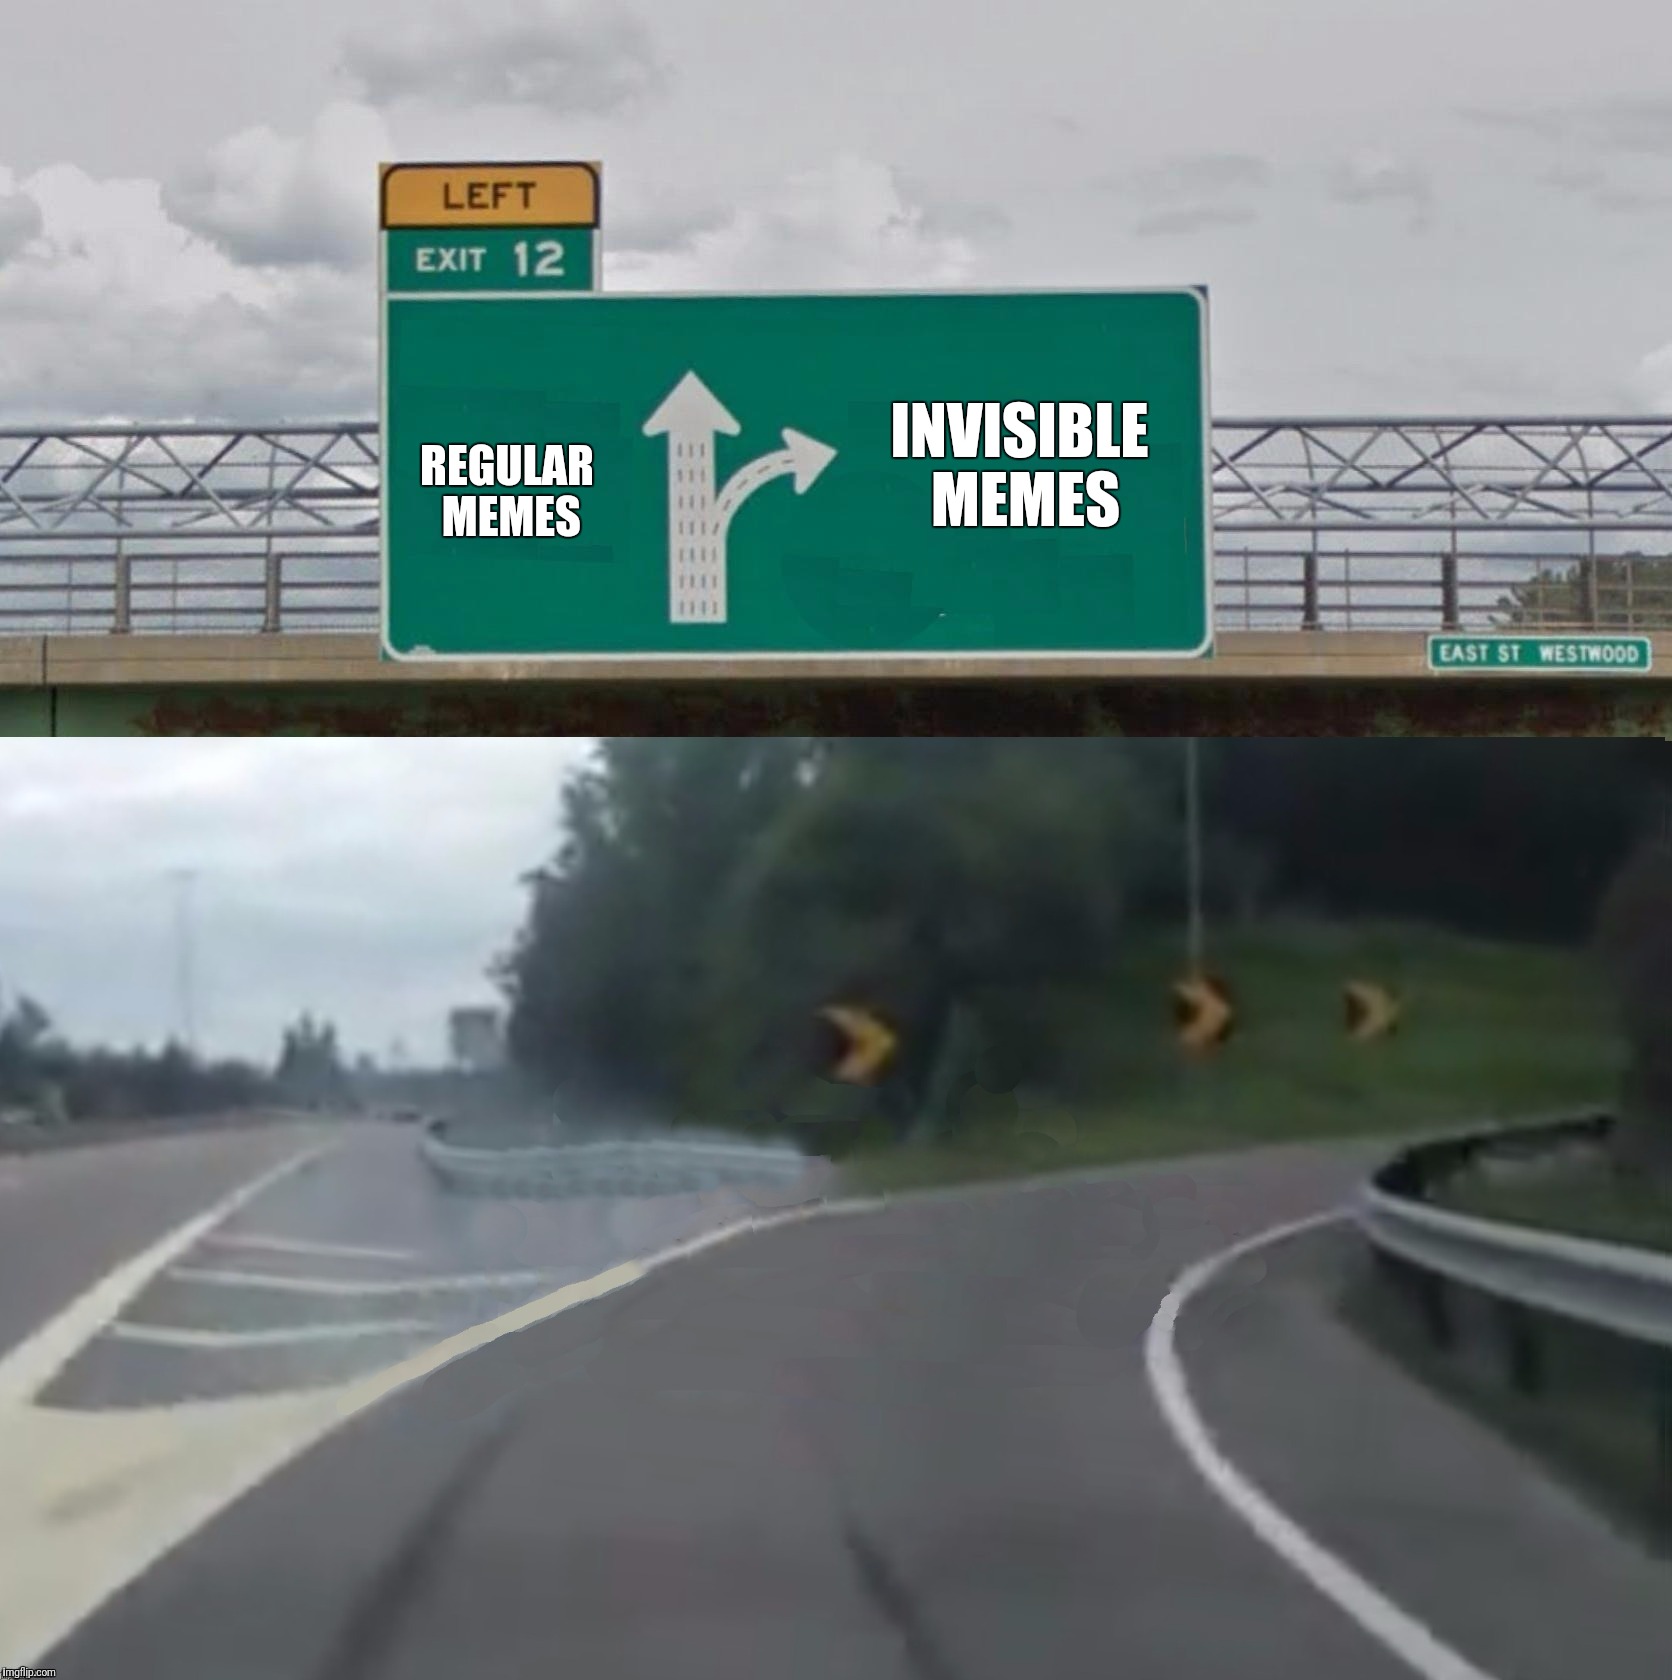 Left Exit 12 Blank | REGULAR MEMES INVISIBLE MEMES | image tagged in left exit 12 blank | made w/ Imgflip meme maker